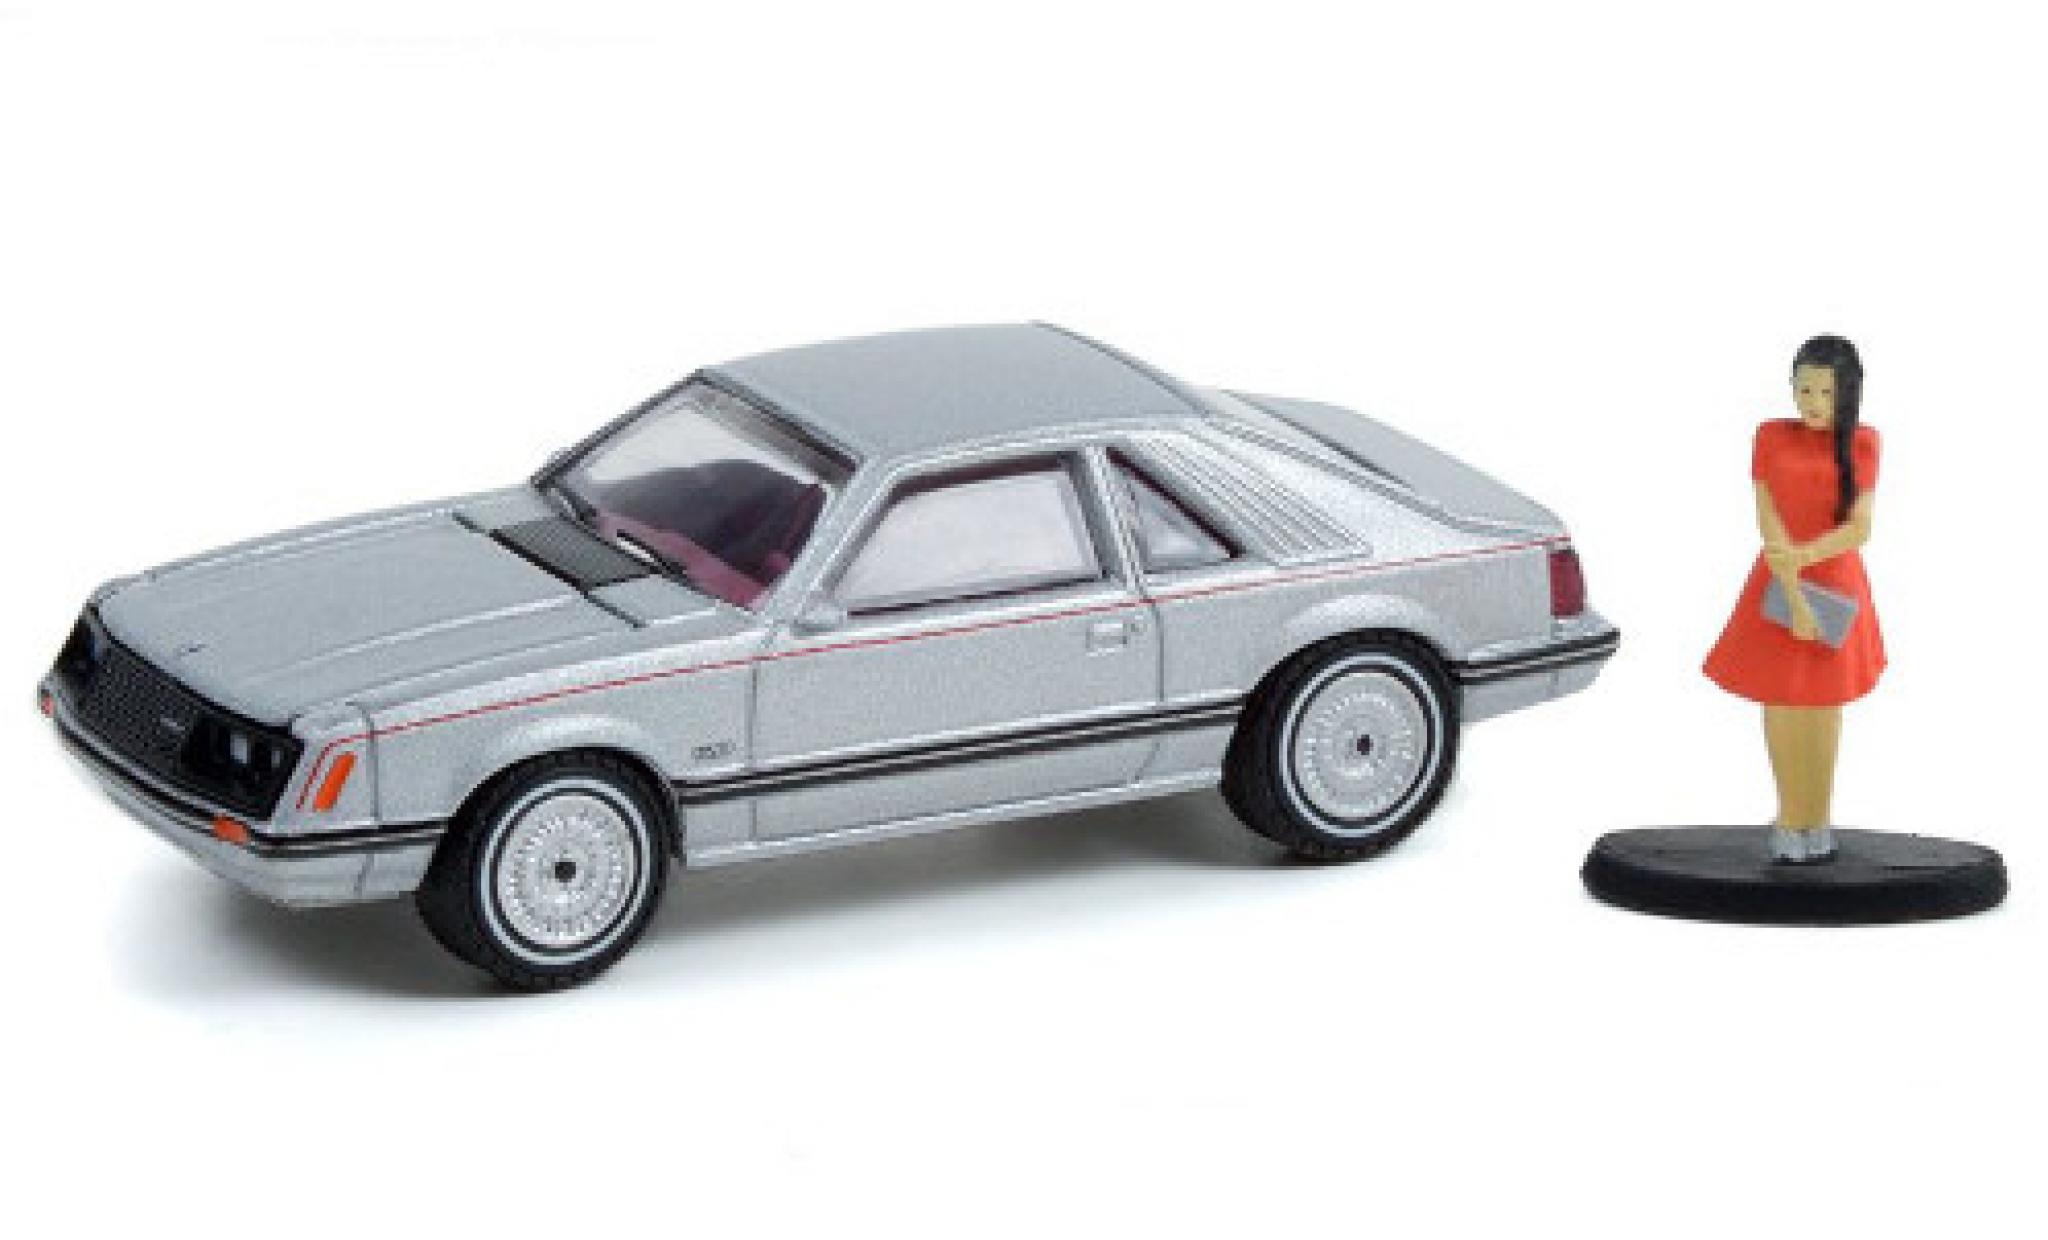 Ford Mustang 1/64 Greenlight Ghia grey 1979 mit Figur